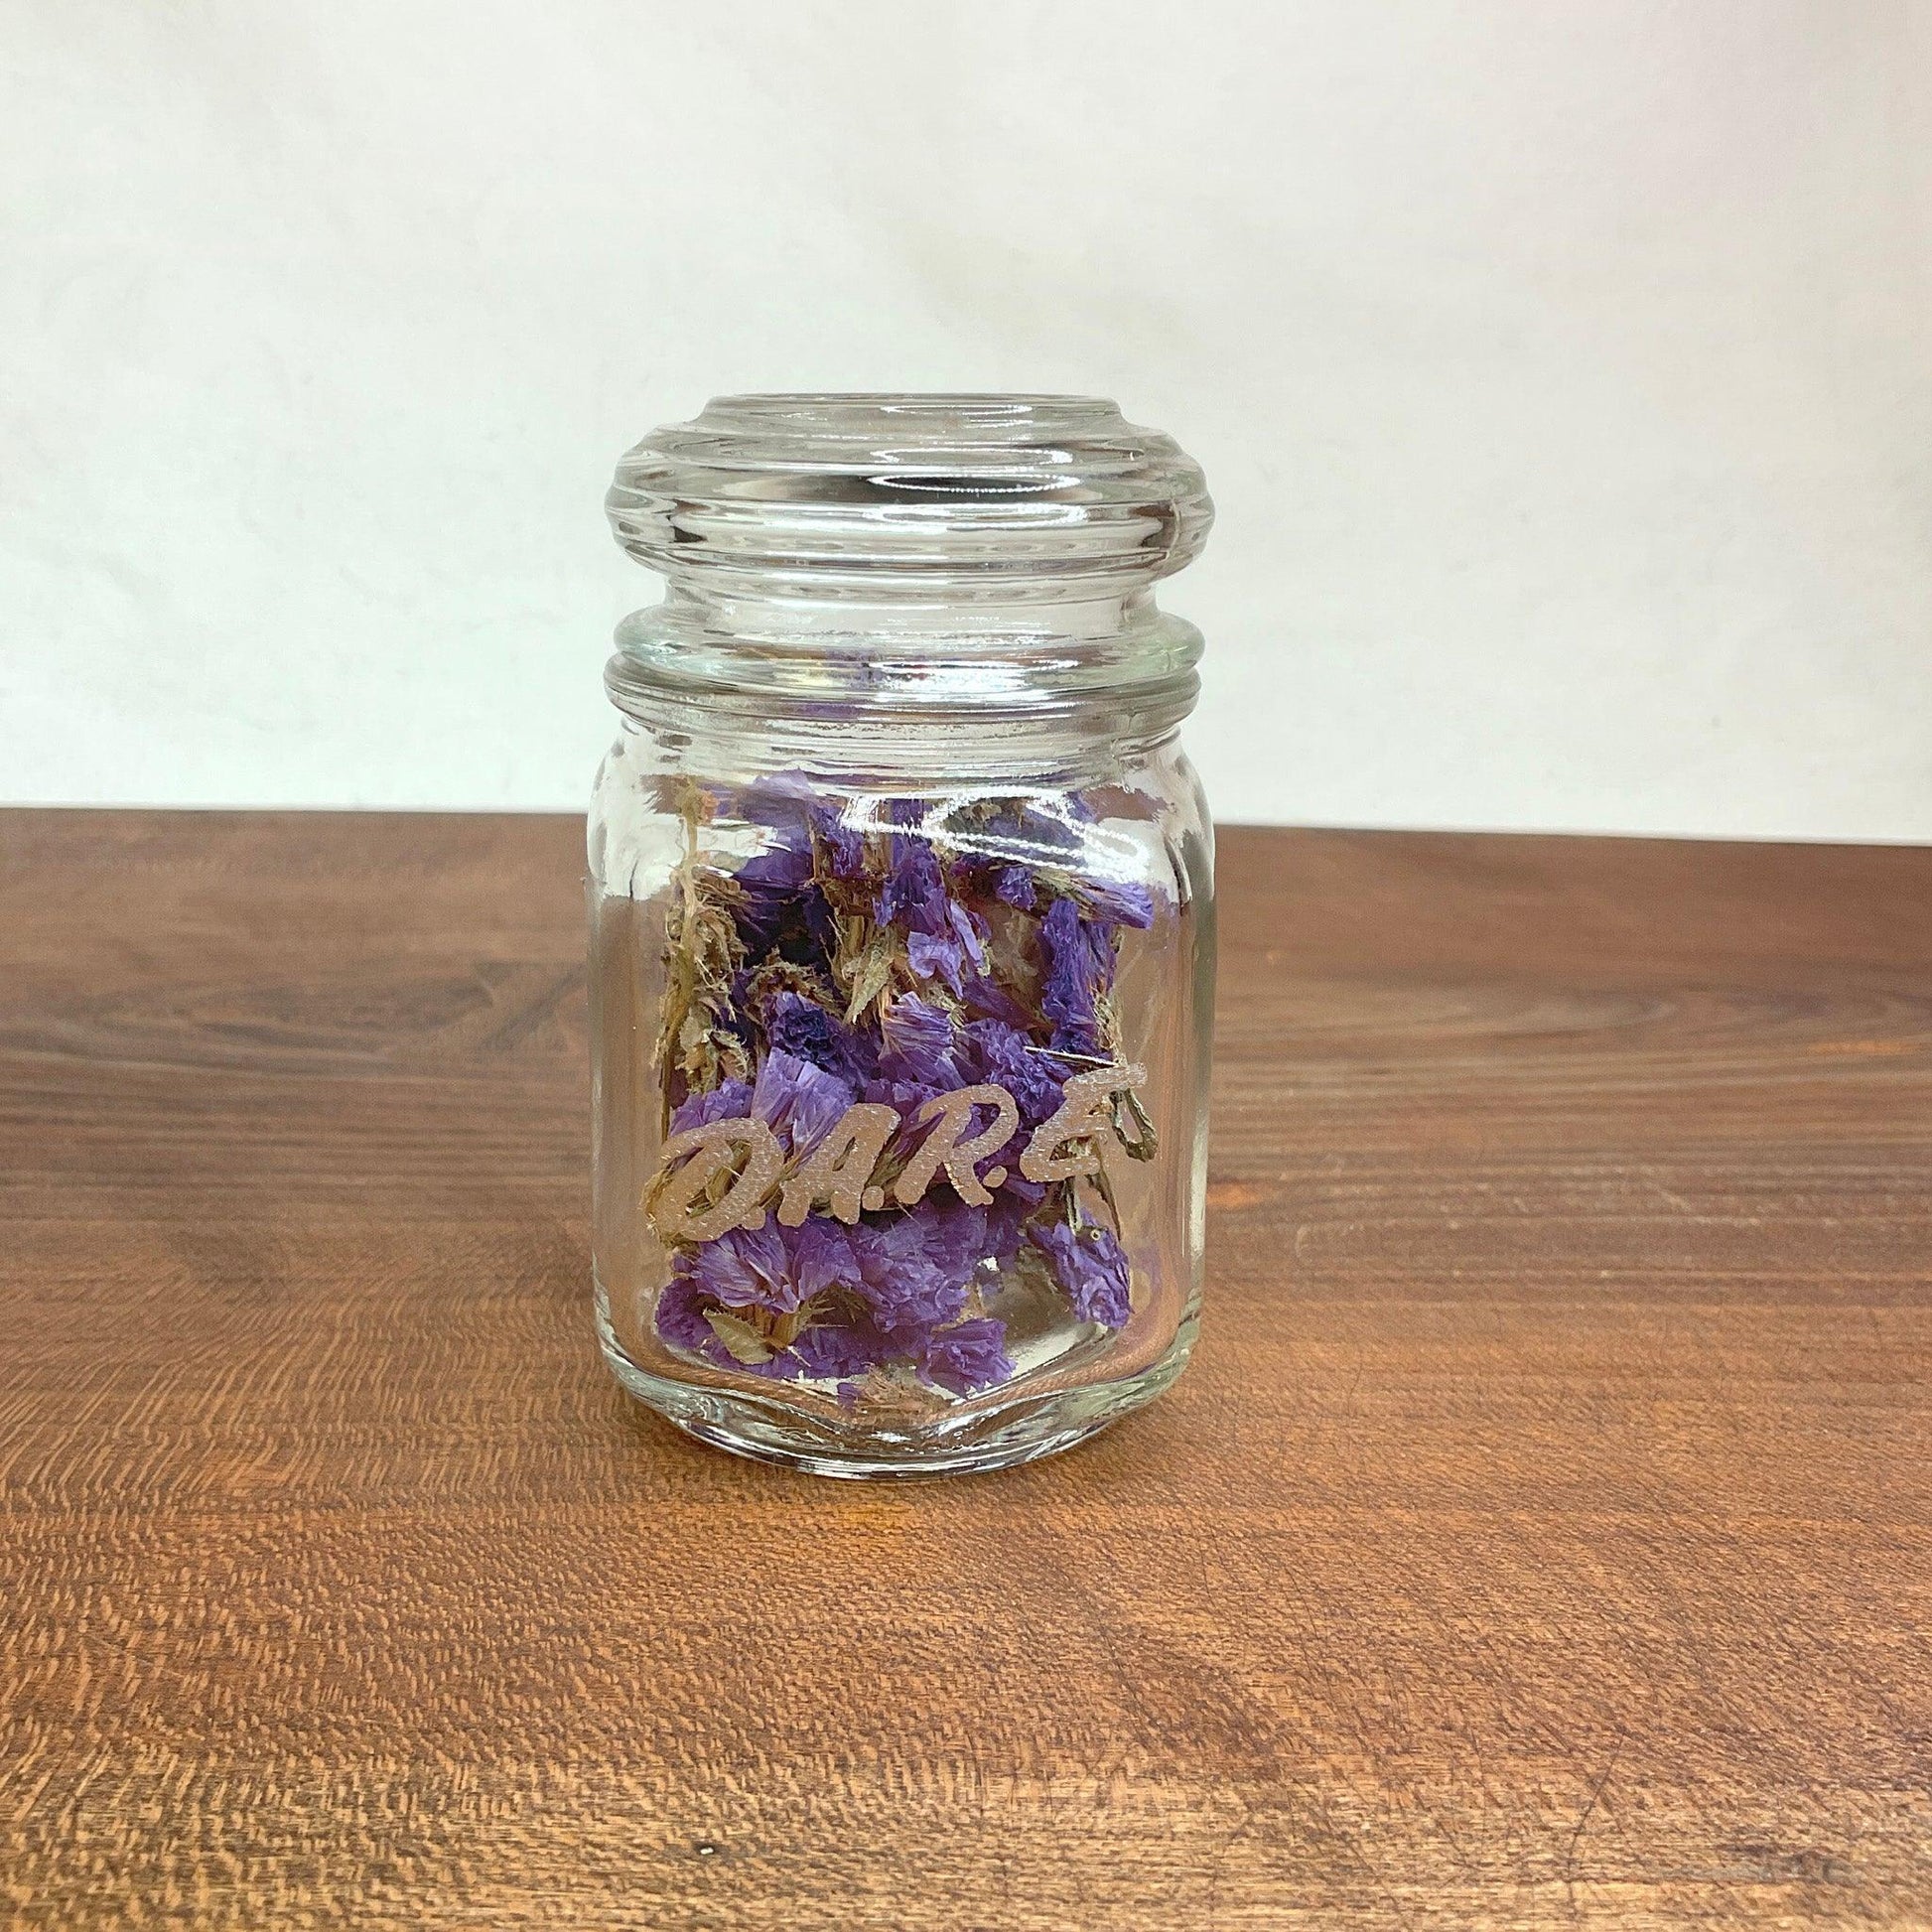 DARE Apothecary Jar - Offensively Domestic